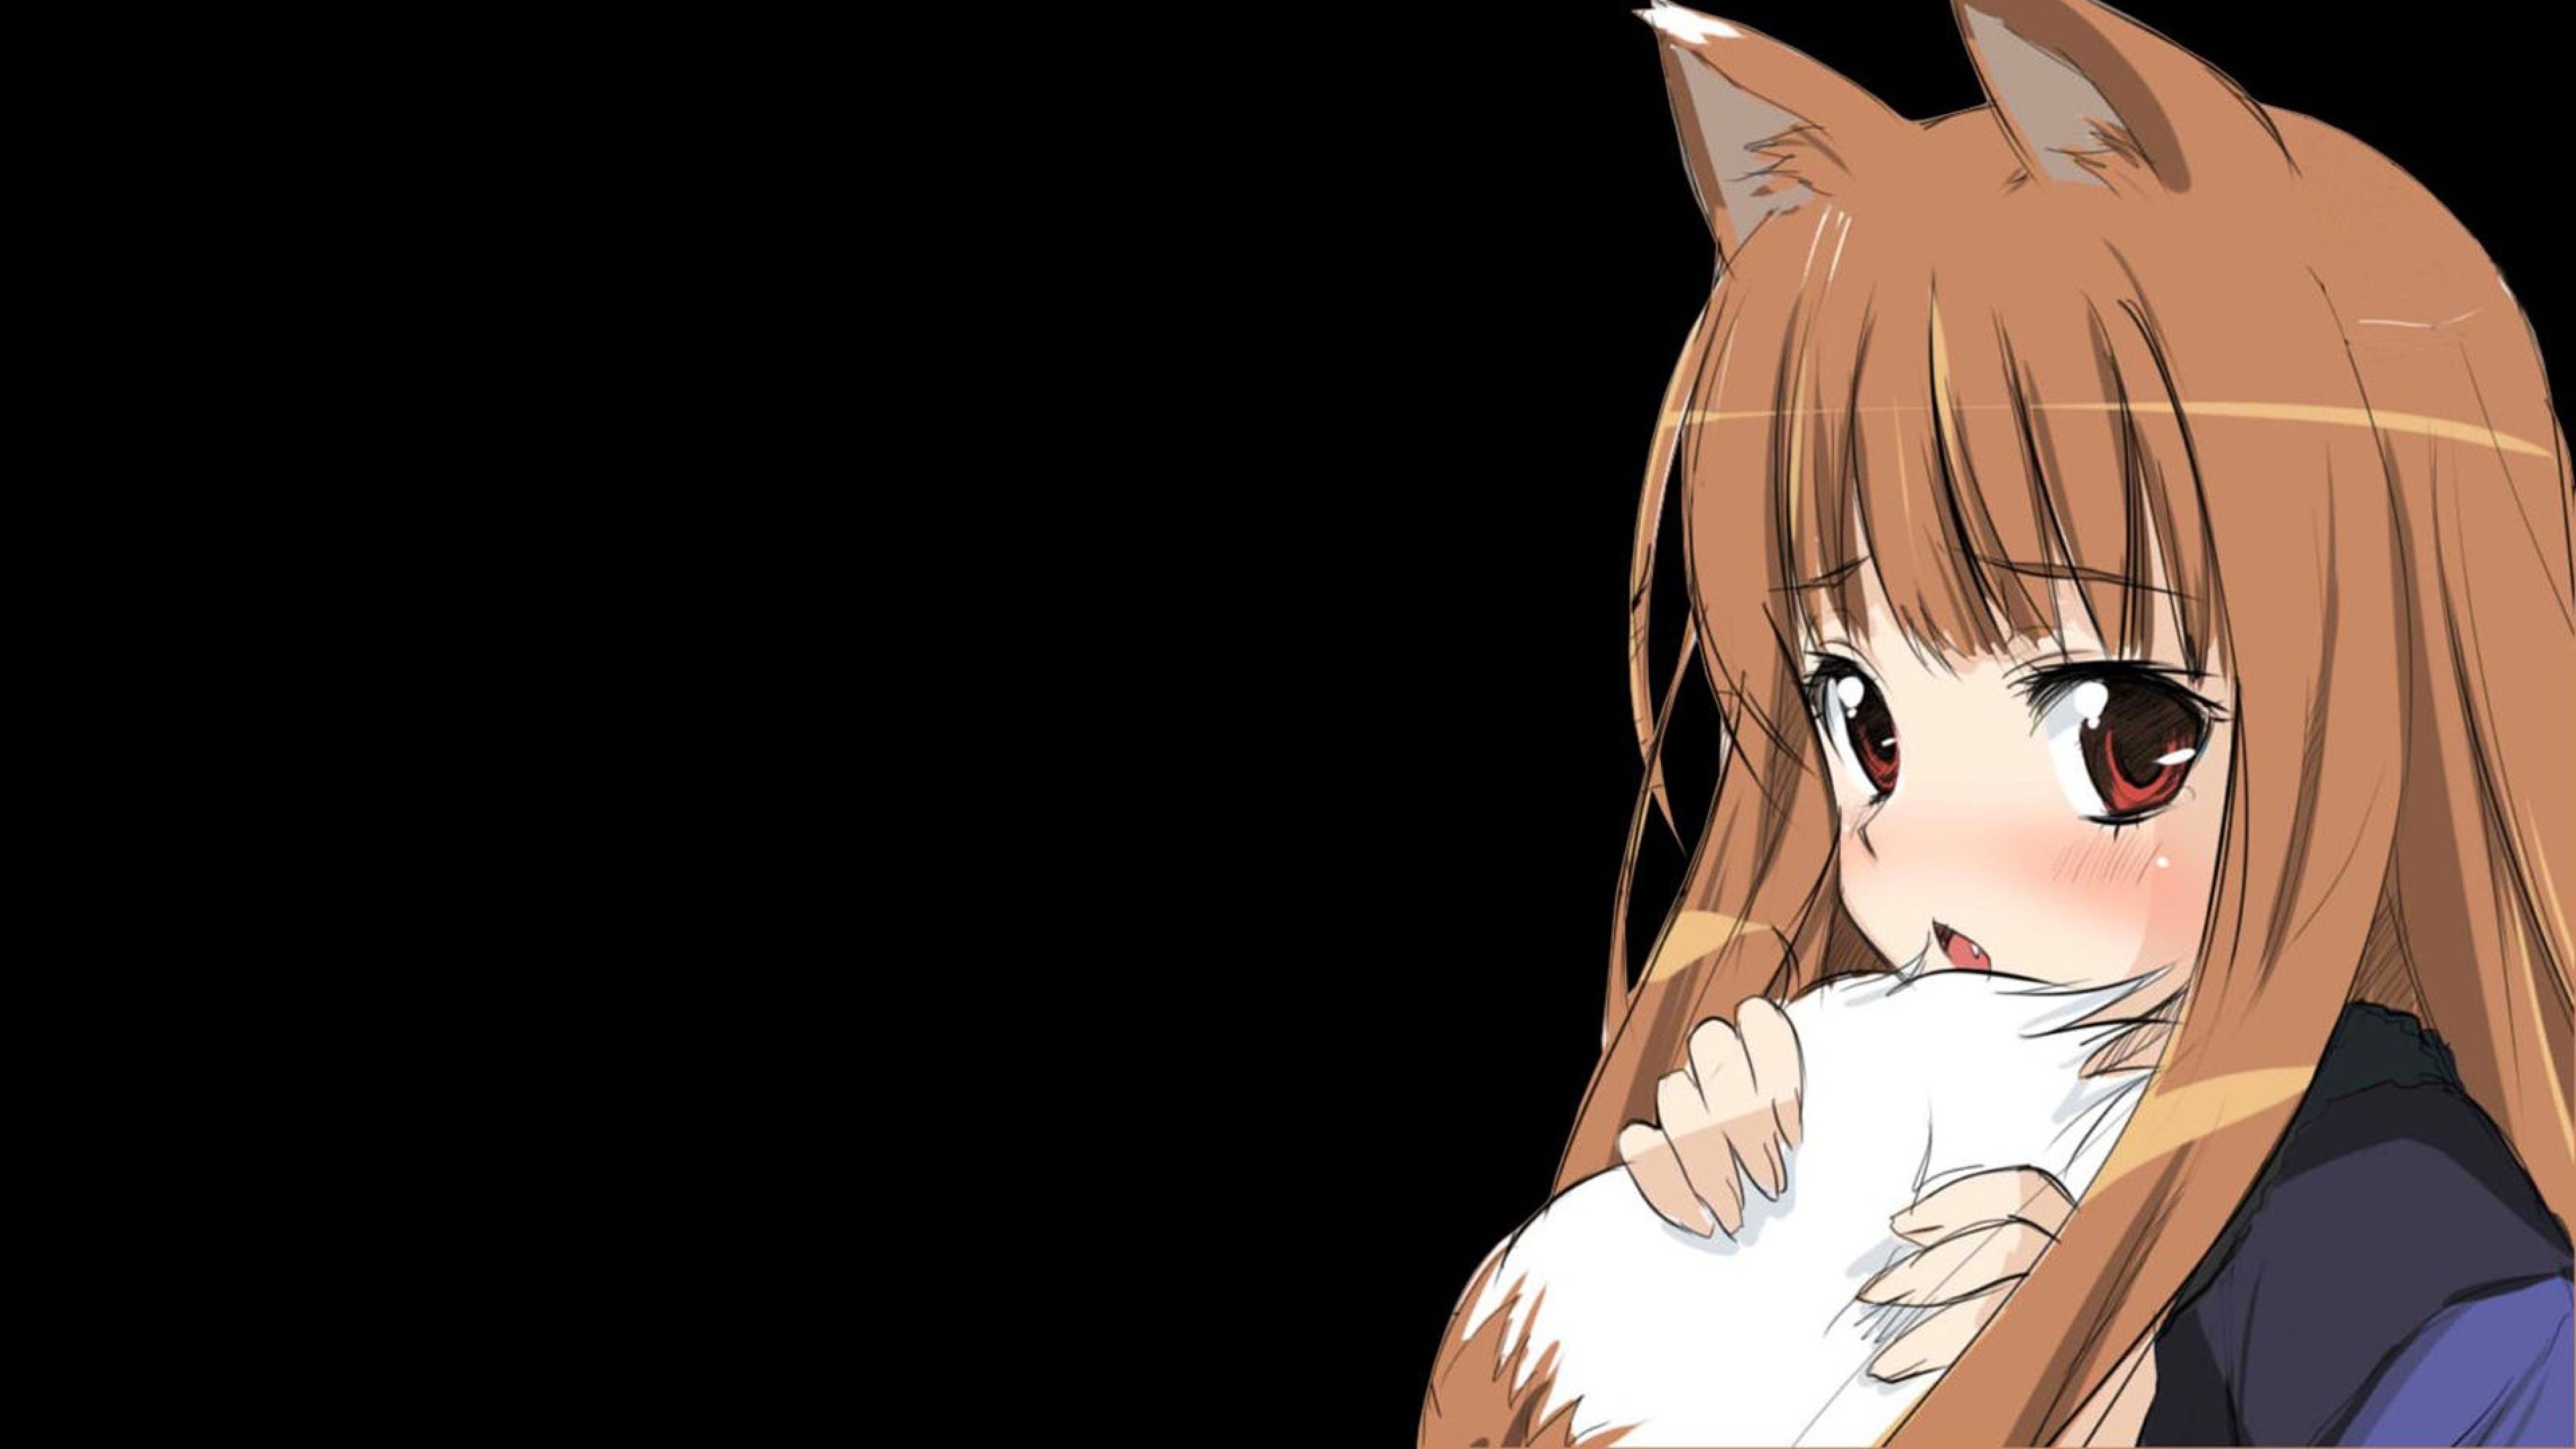 Spice and Wolf (Anime): Girl escaped from the field, Inhabiting the wheat on a merchant's cart. 3840x2160 4K Wallpaper.